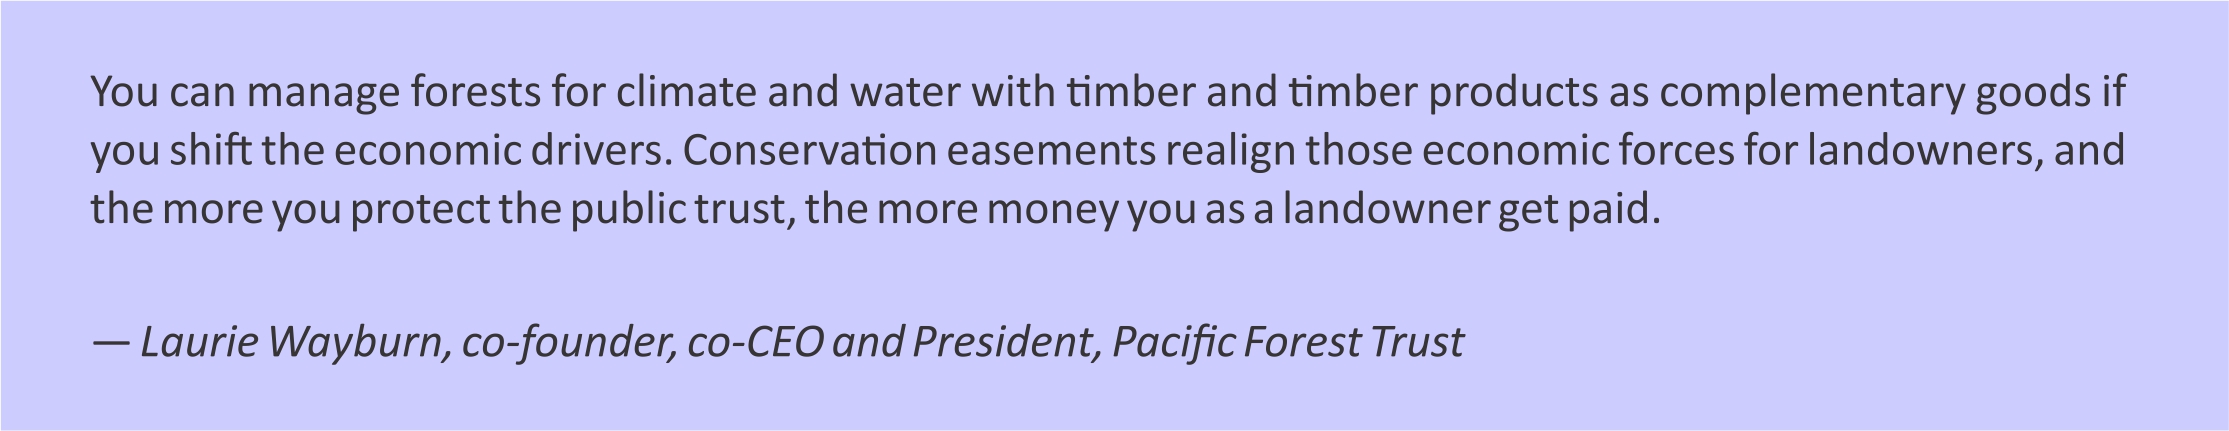 Conservation easements as a tool to implement REDD+